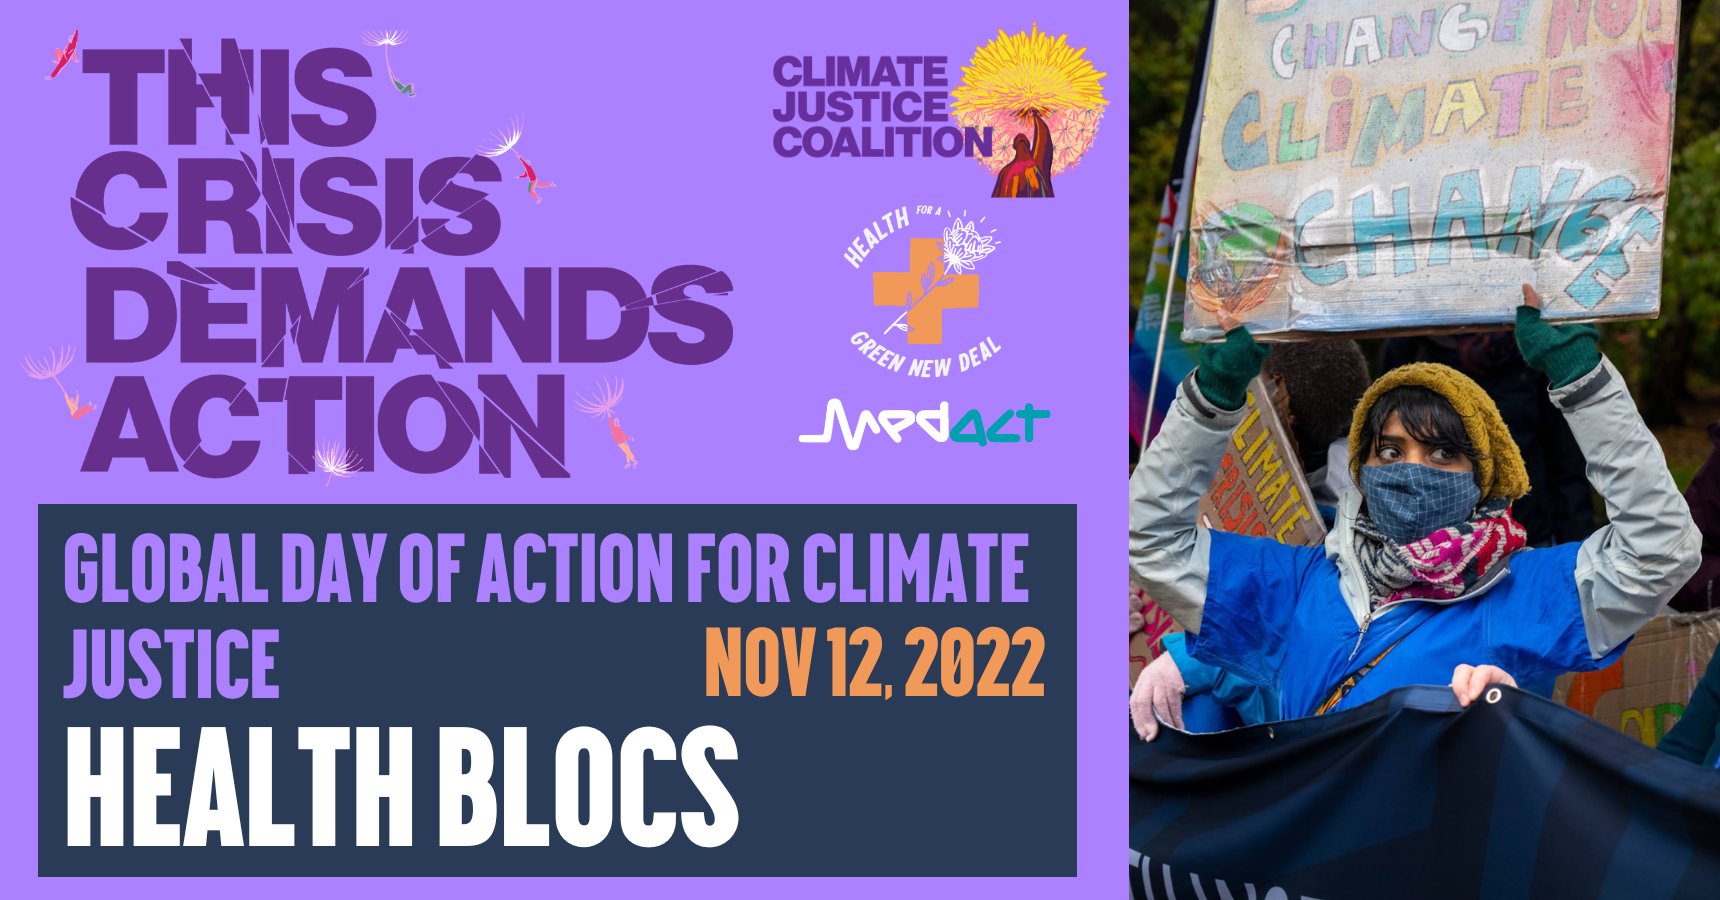 Health blocs @ Global Day of Action for Climate Justice 2022